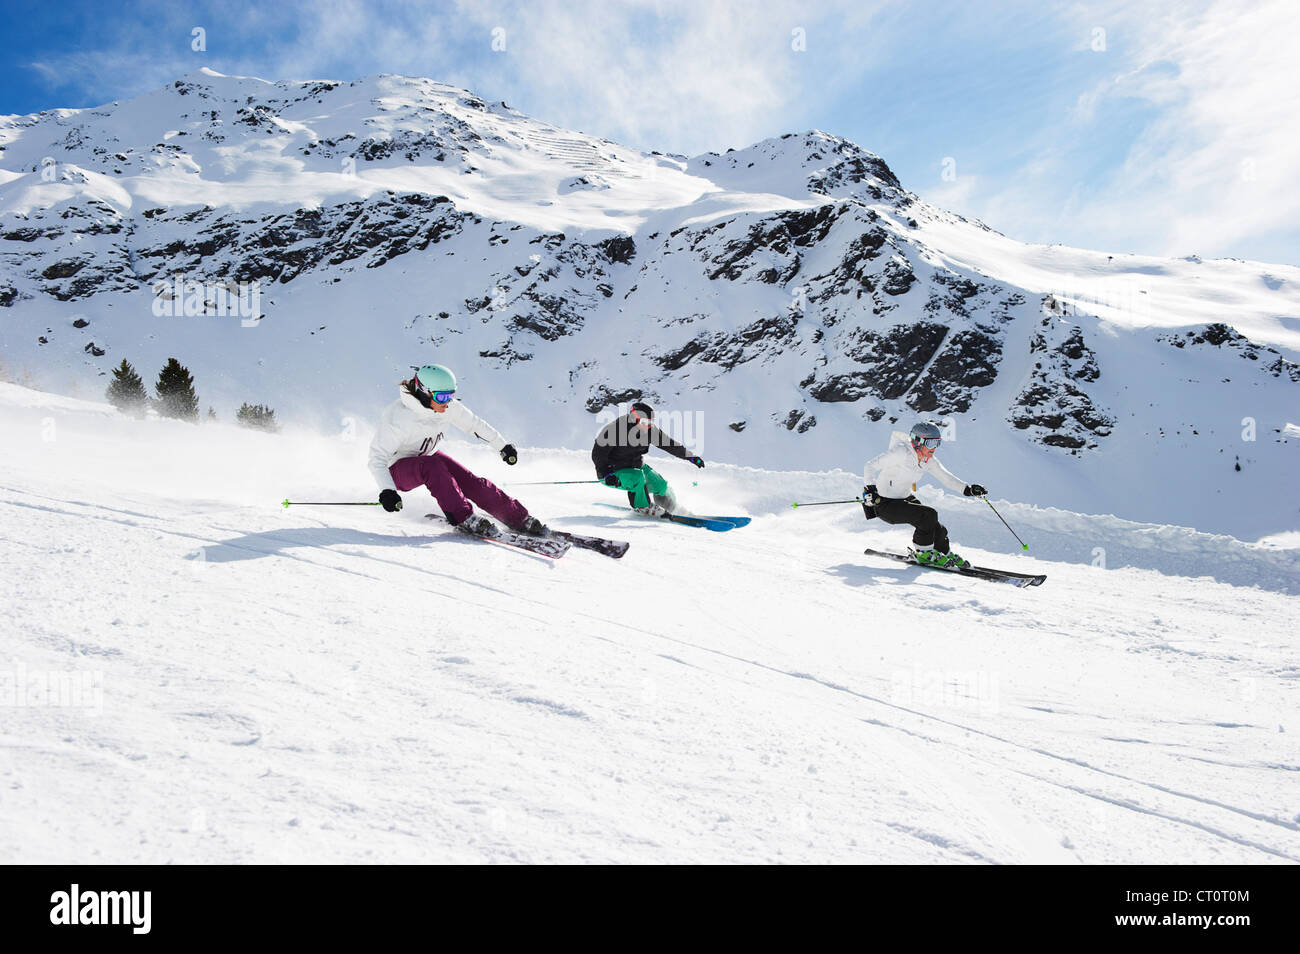 Skiers skiing together on slope Stock Photo